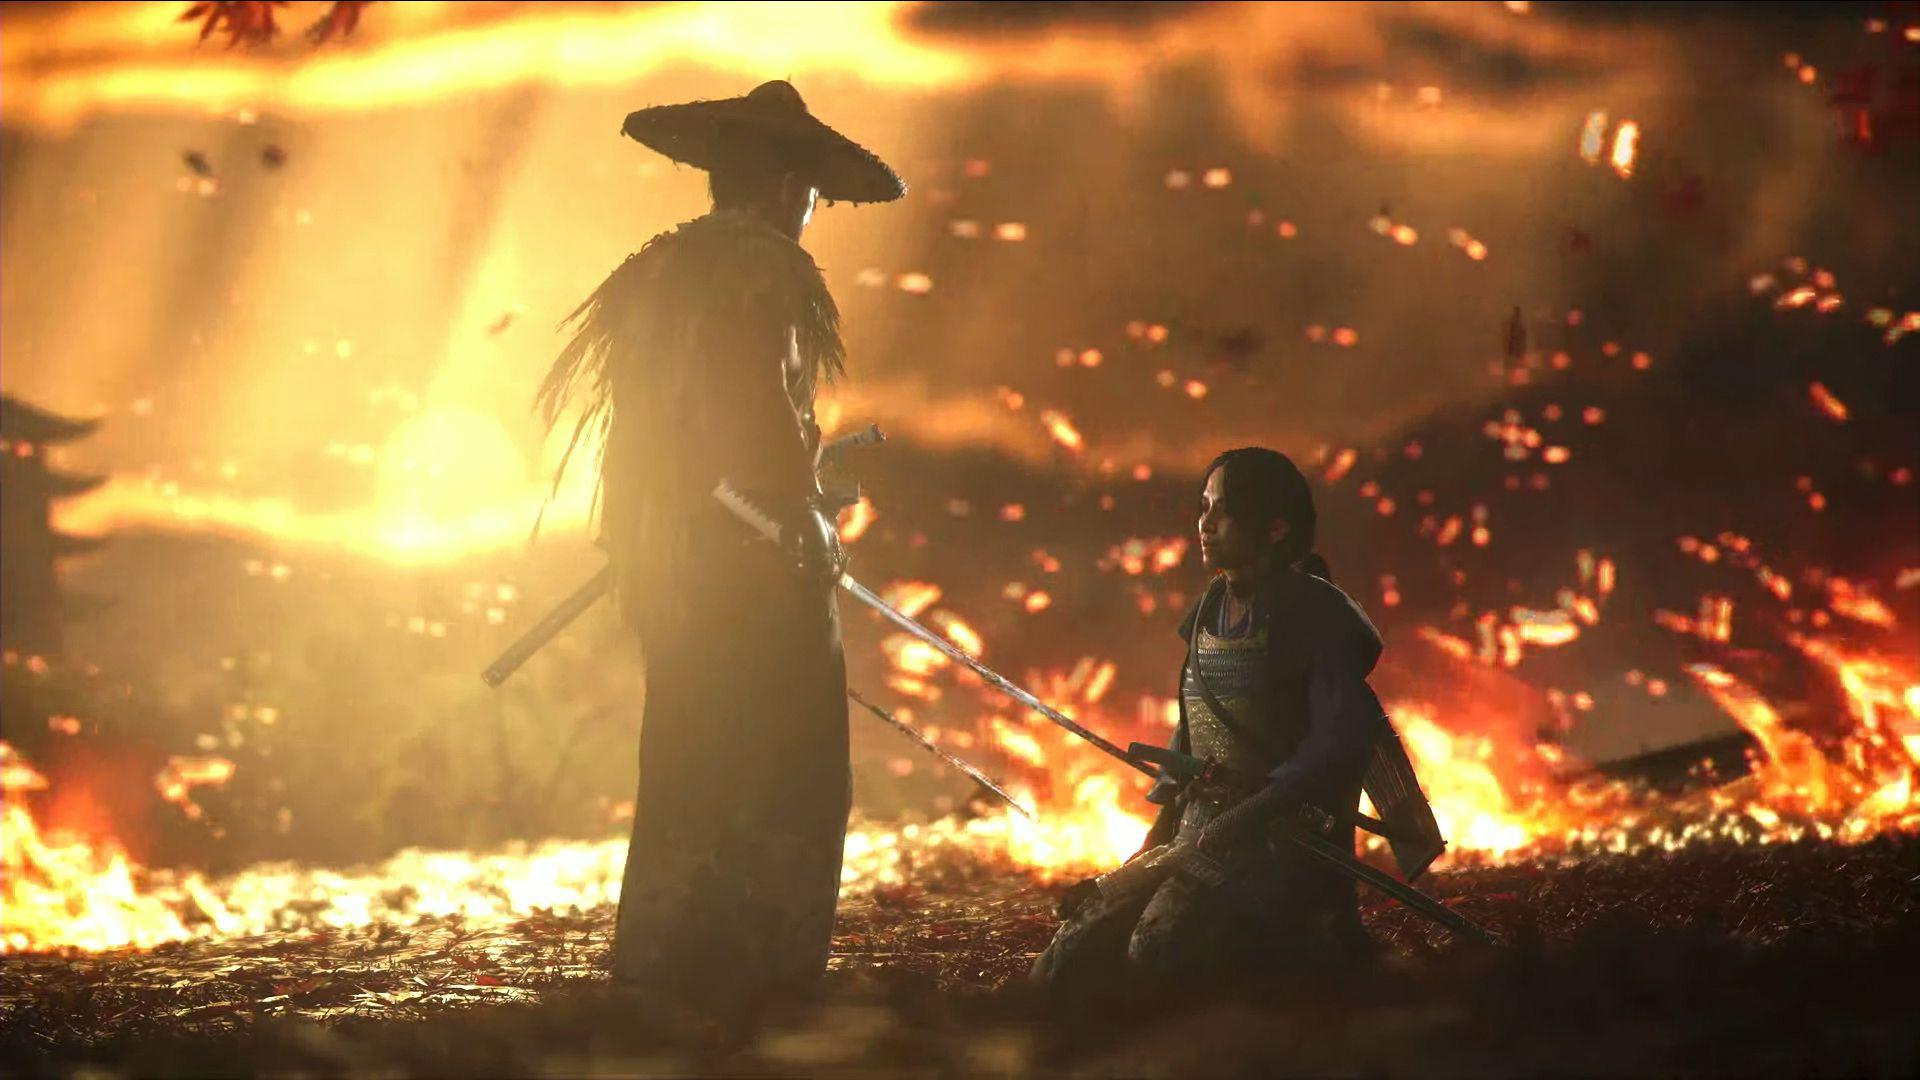 Watch Sony's new trailer for Ghost of Tsushima from its E3